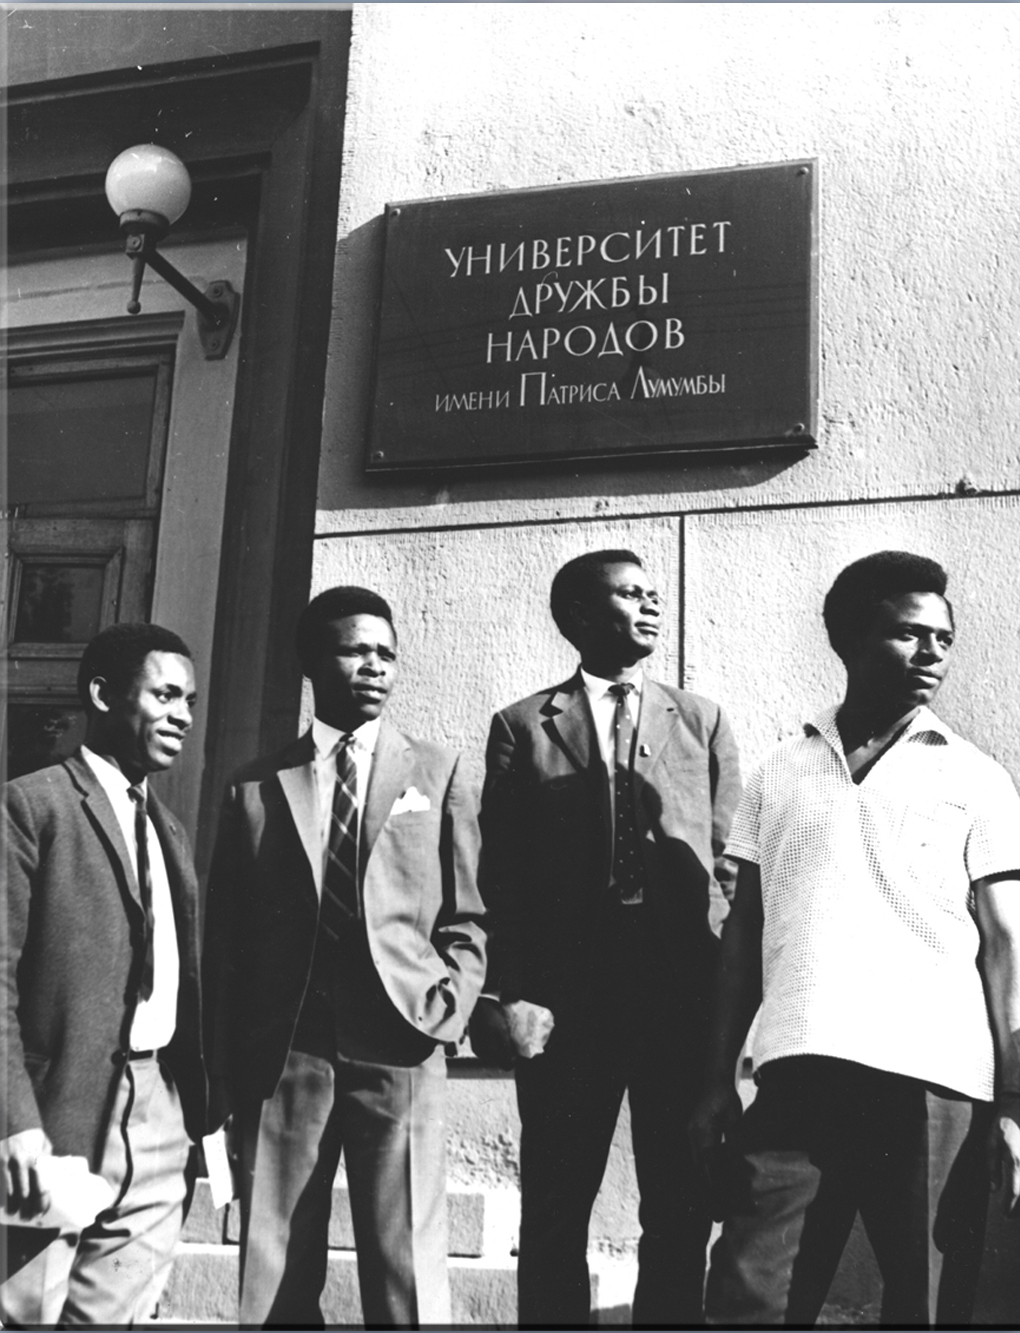 1.The Peoples’ Friendship University was established on February 5, 1960. Until the early 1990s, it bore the name of the first Prime Minister of Congo, Patrice Lumumba.